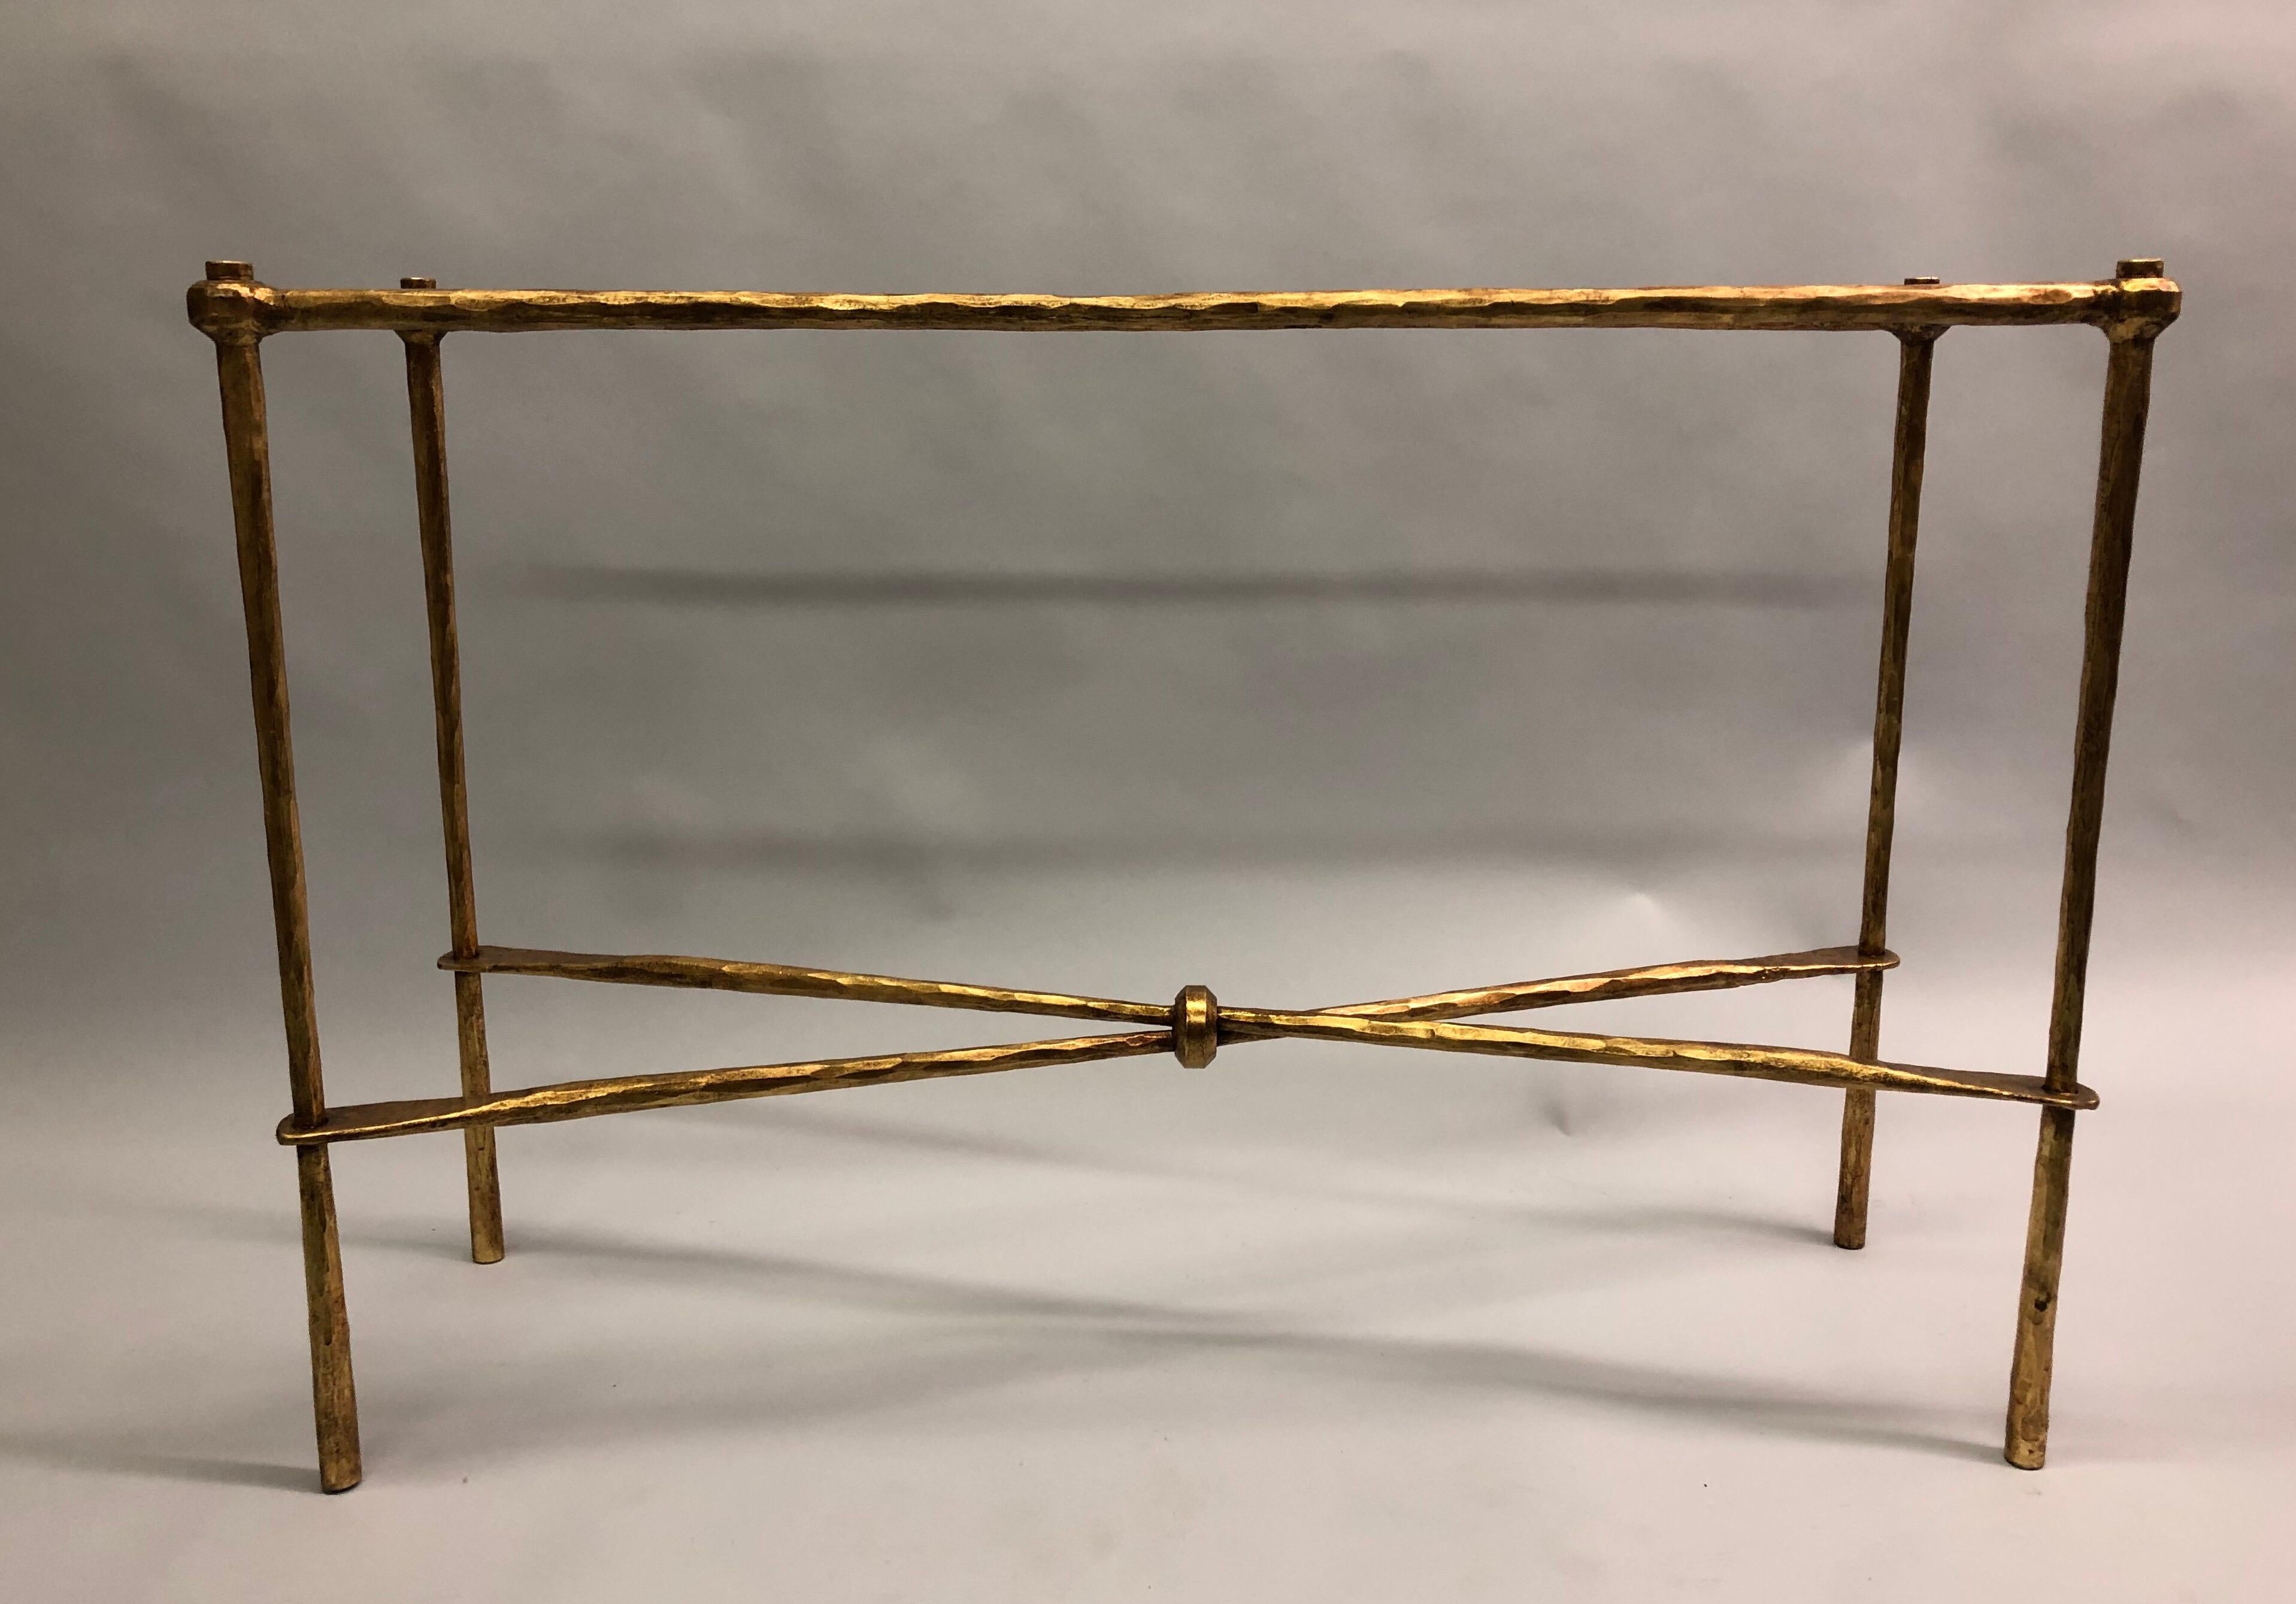 2 Italian Mid-Century Modern neoclassical hand hammered iron and gilt consoles / sofa tables by Giovanni Banci for Hermes. The consoles feature a stunning X-frame design cross-stretcher which pass through an open hammered iron ring, Deep individual